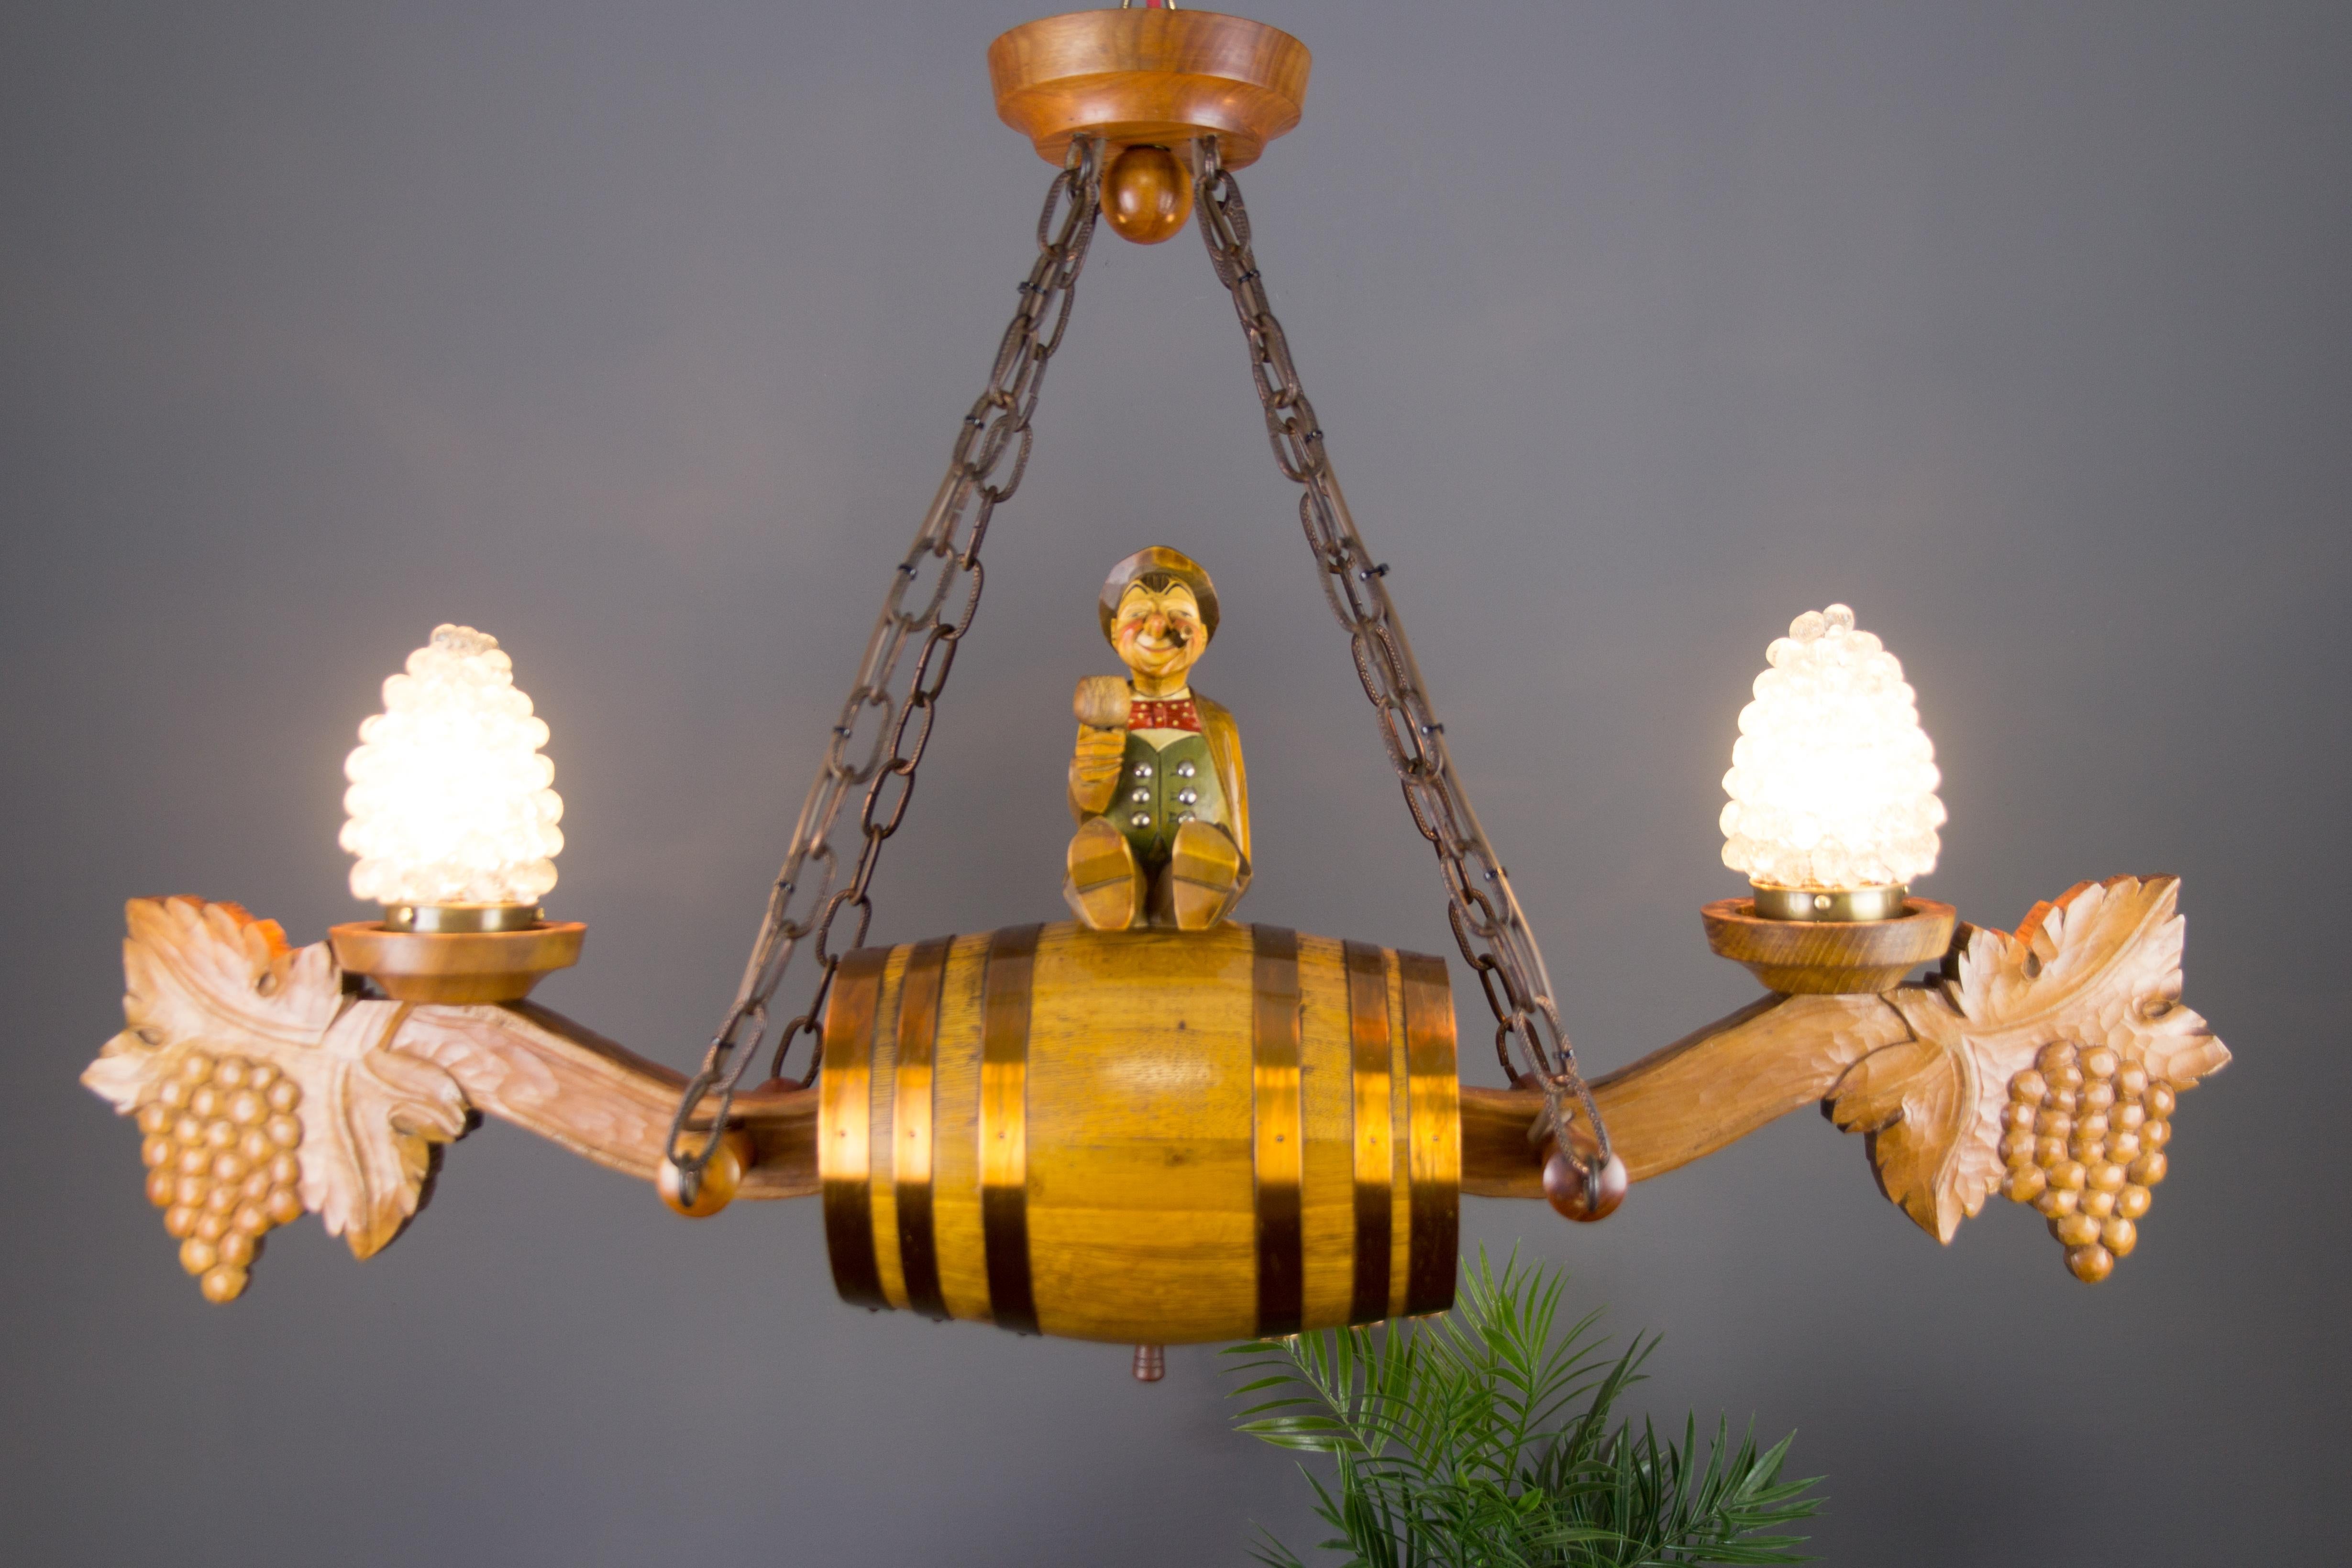 This interesting and unusual hand-carved wooden chandelier features a centered large wine barrel and a wooden figurine of the winegrower sitting on it. The ends of the chandelier are decorated with two impressive carved bunches of grapes and two